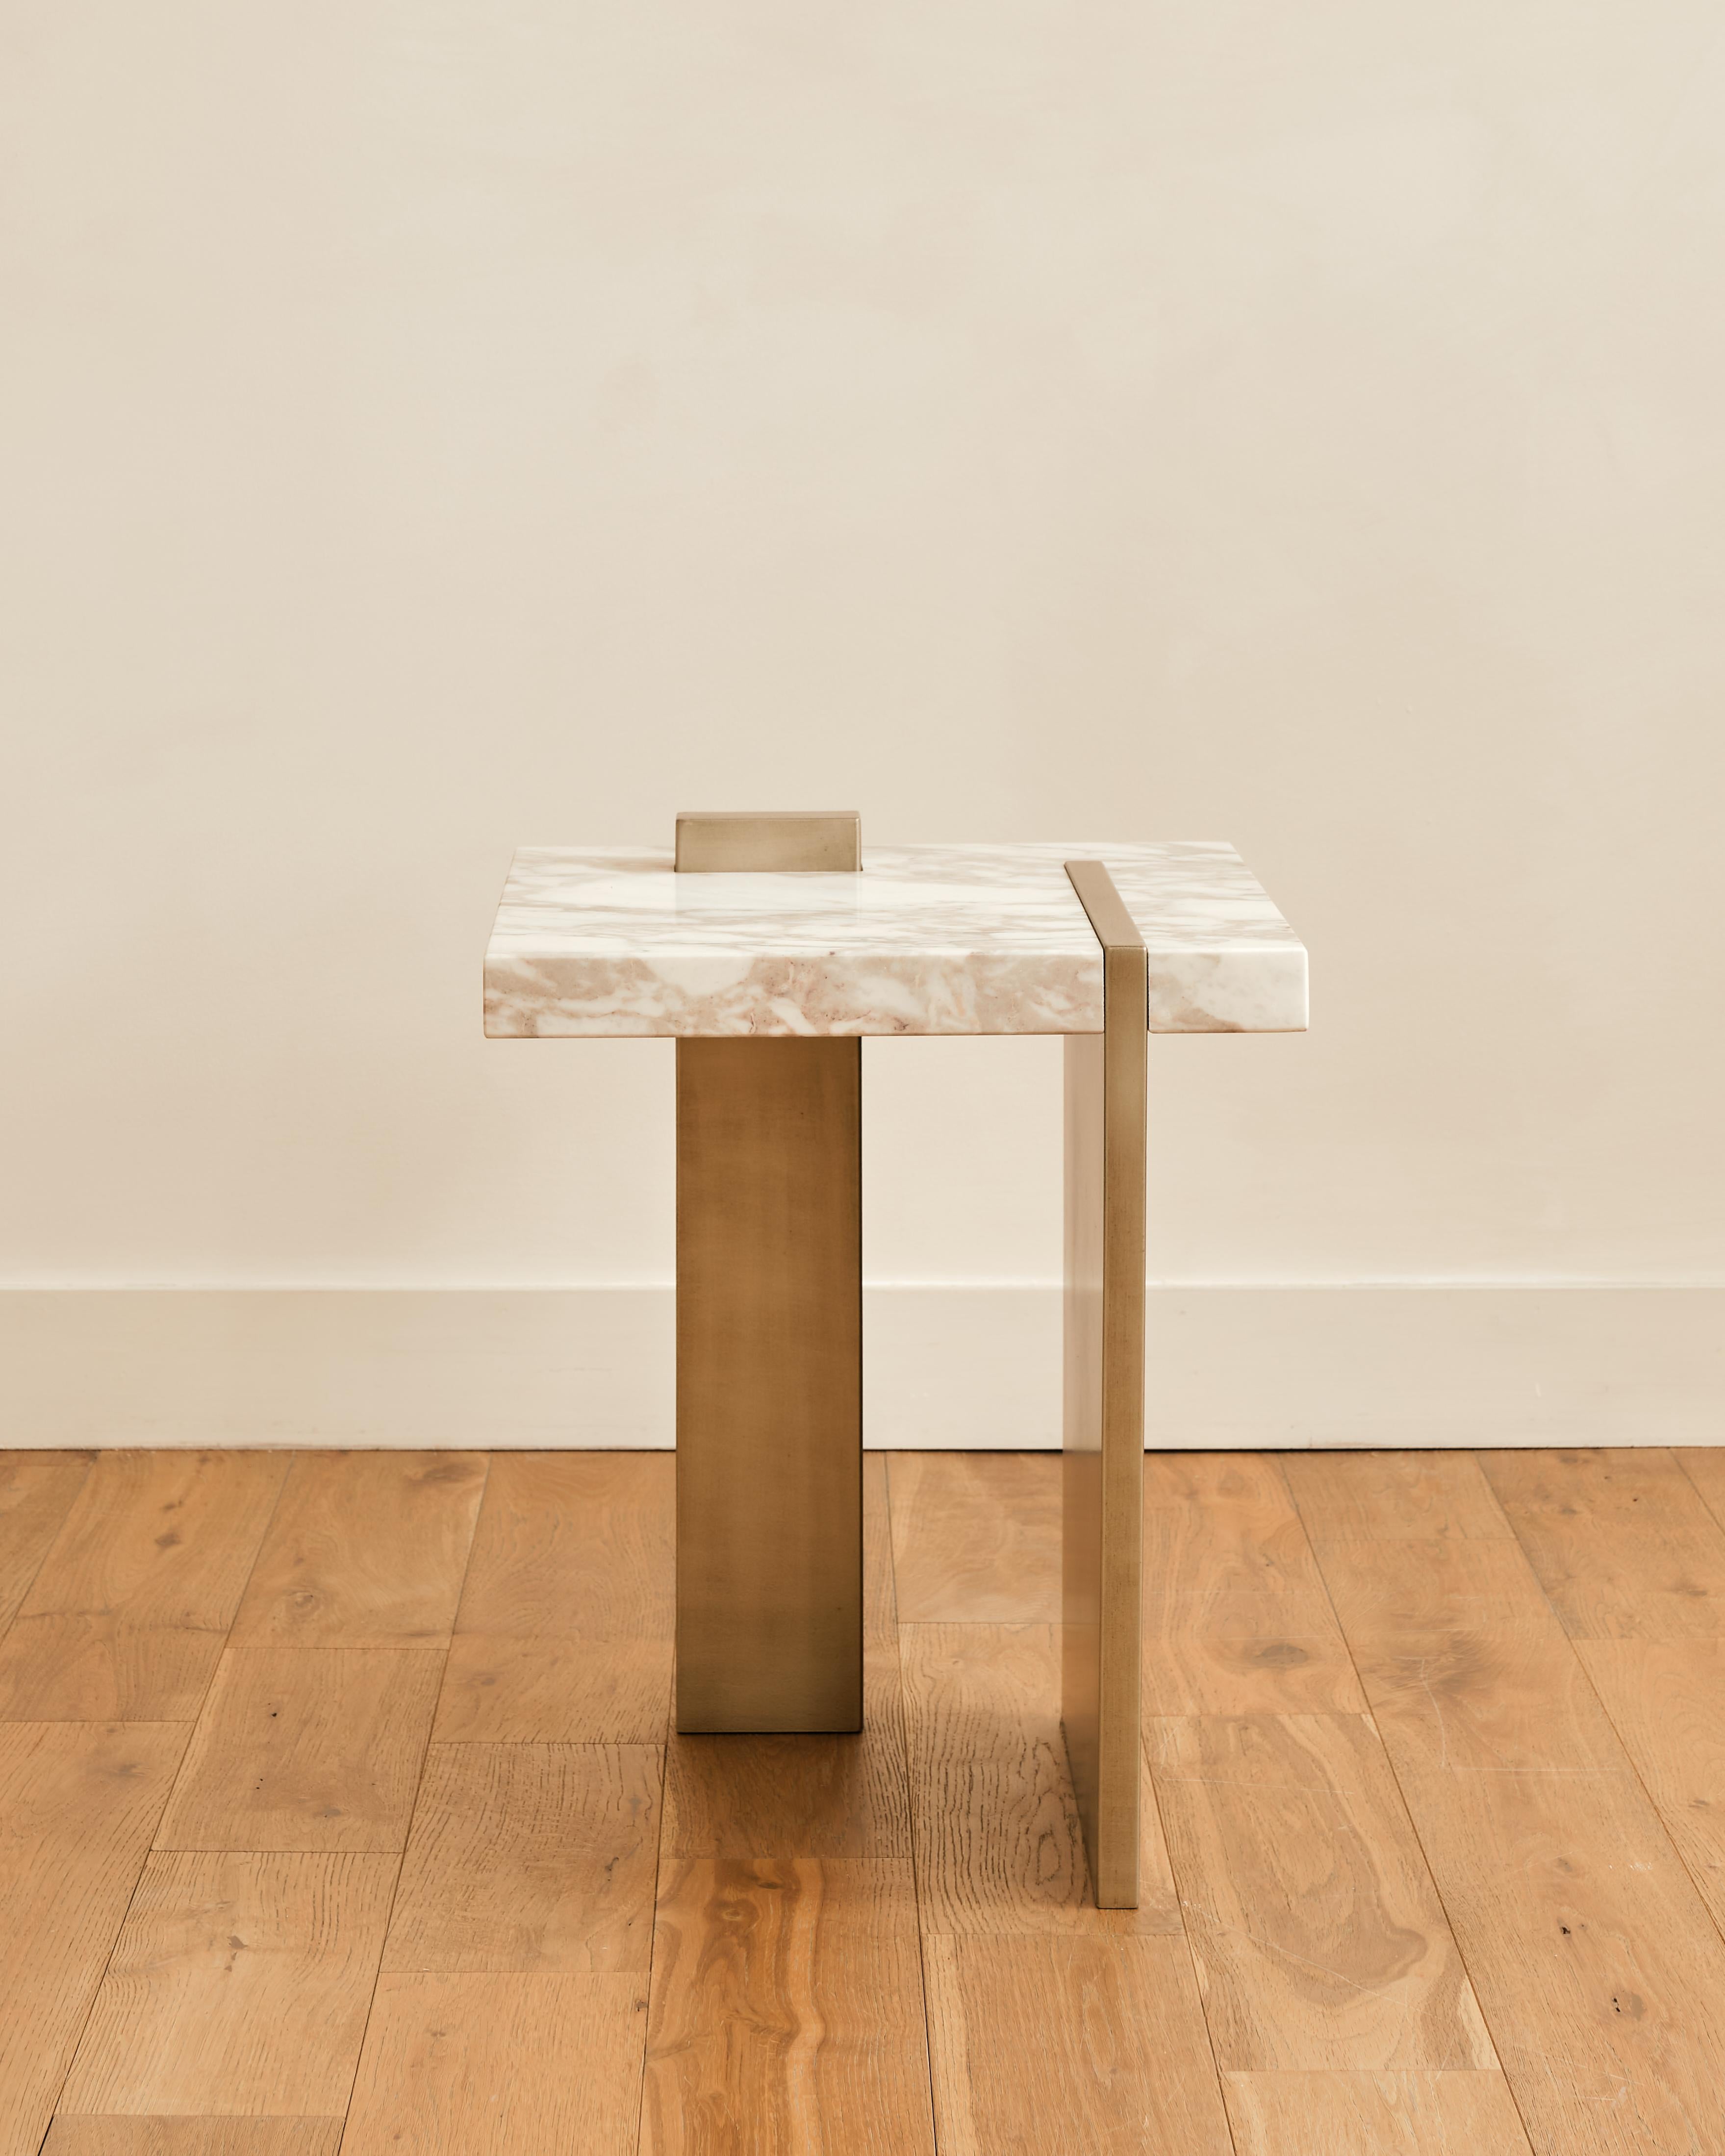 The Capri side table by Studio Sam London is inspired by the rocks of Capri, represented by the solid marble slab that meet the sea on an early morning sunrise, represented by the application of the liquid metal in the base and top detail.
The